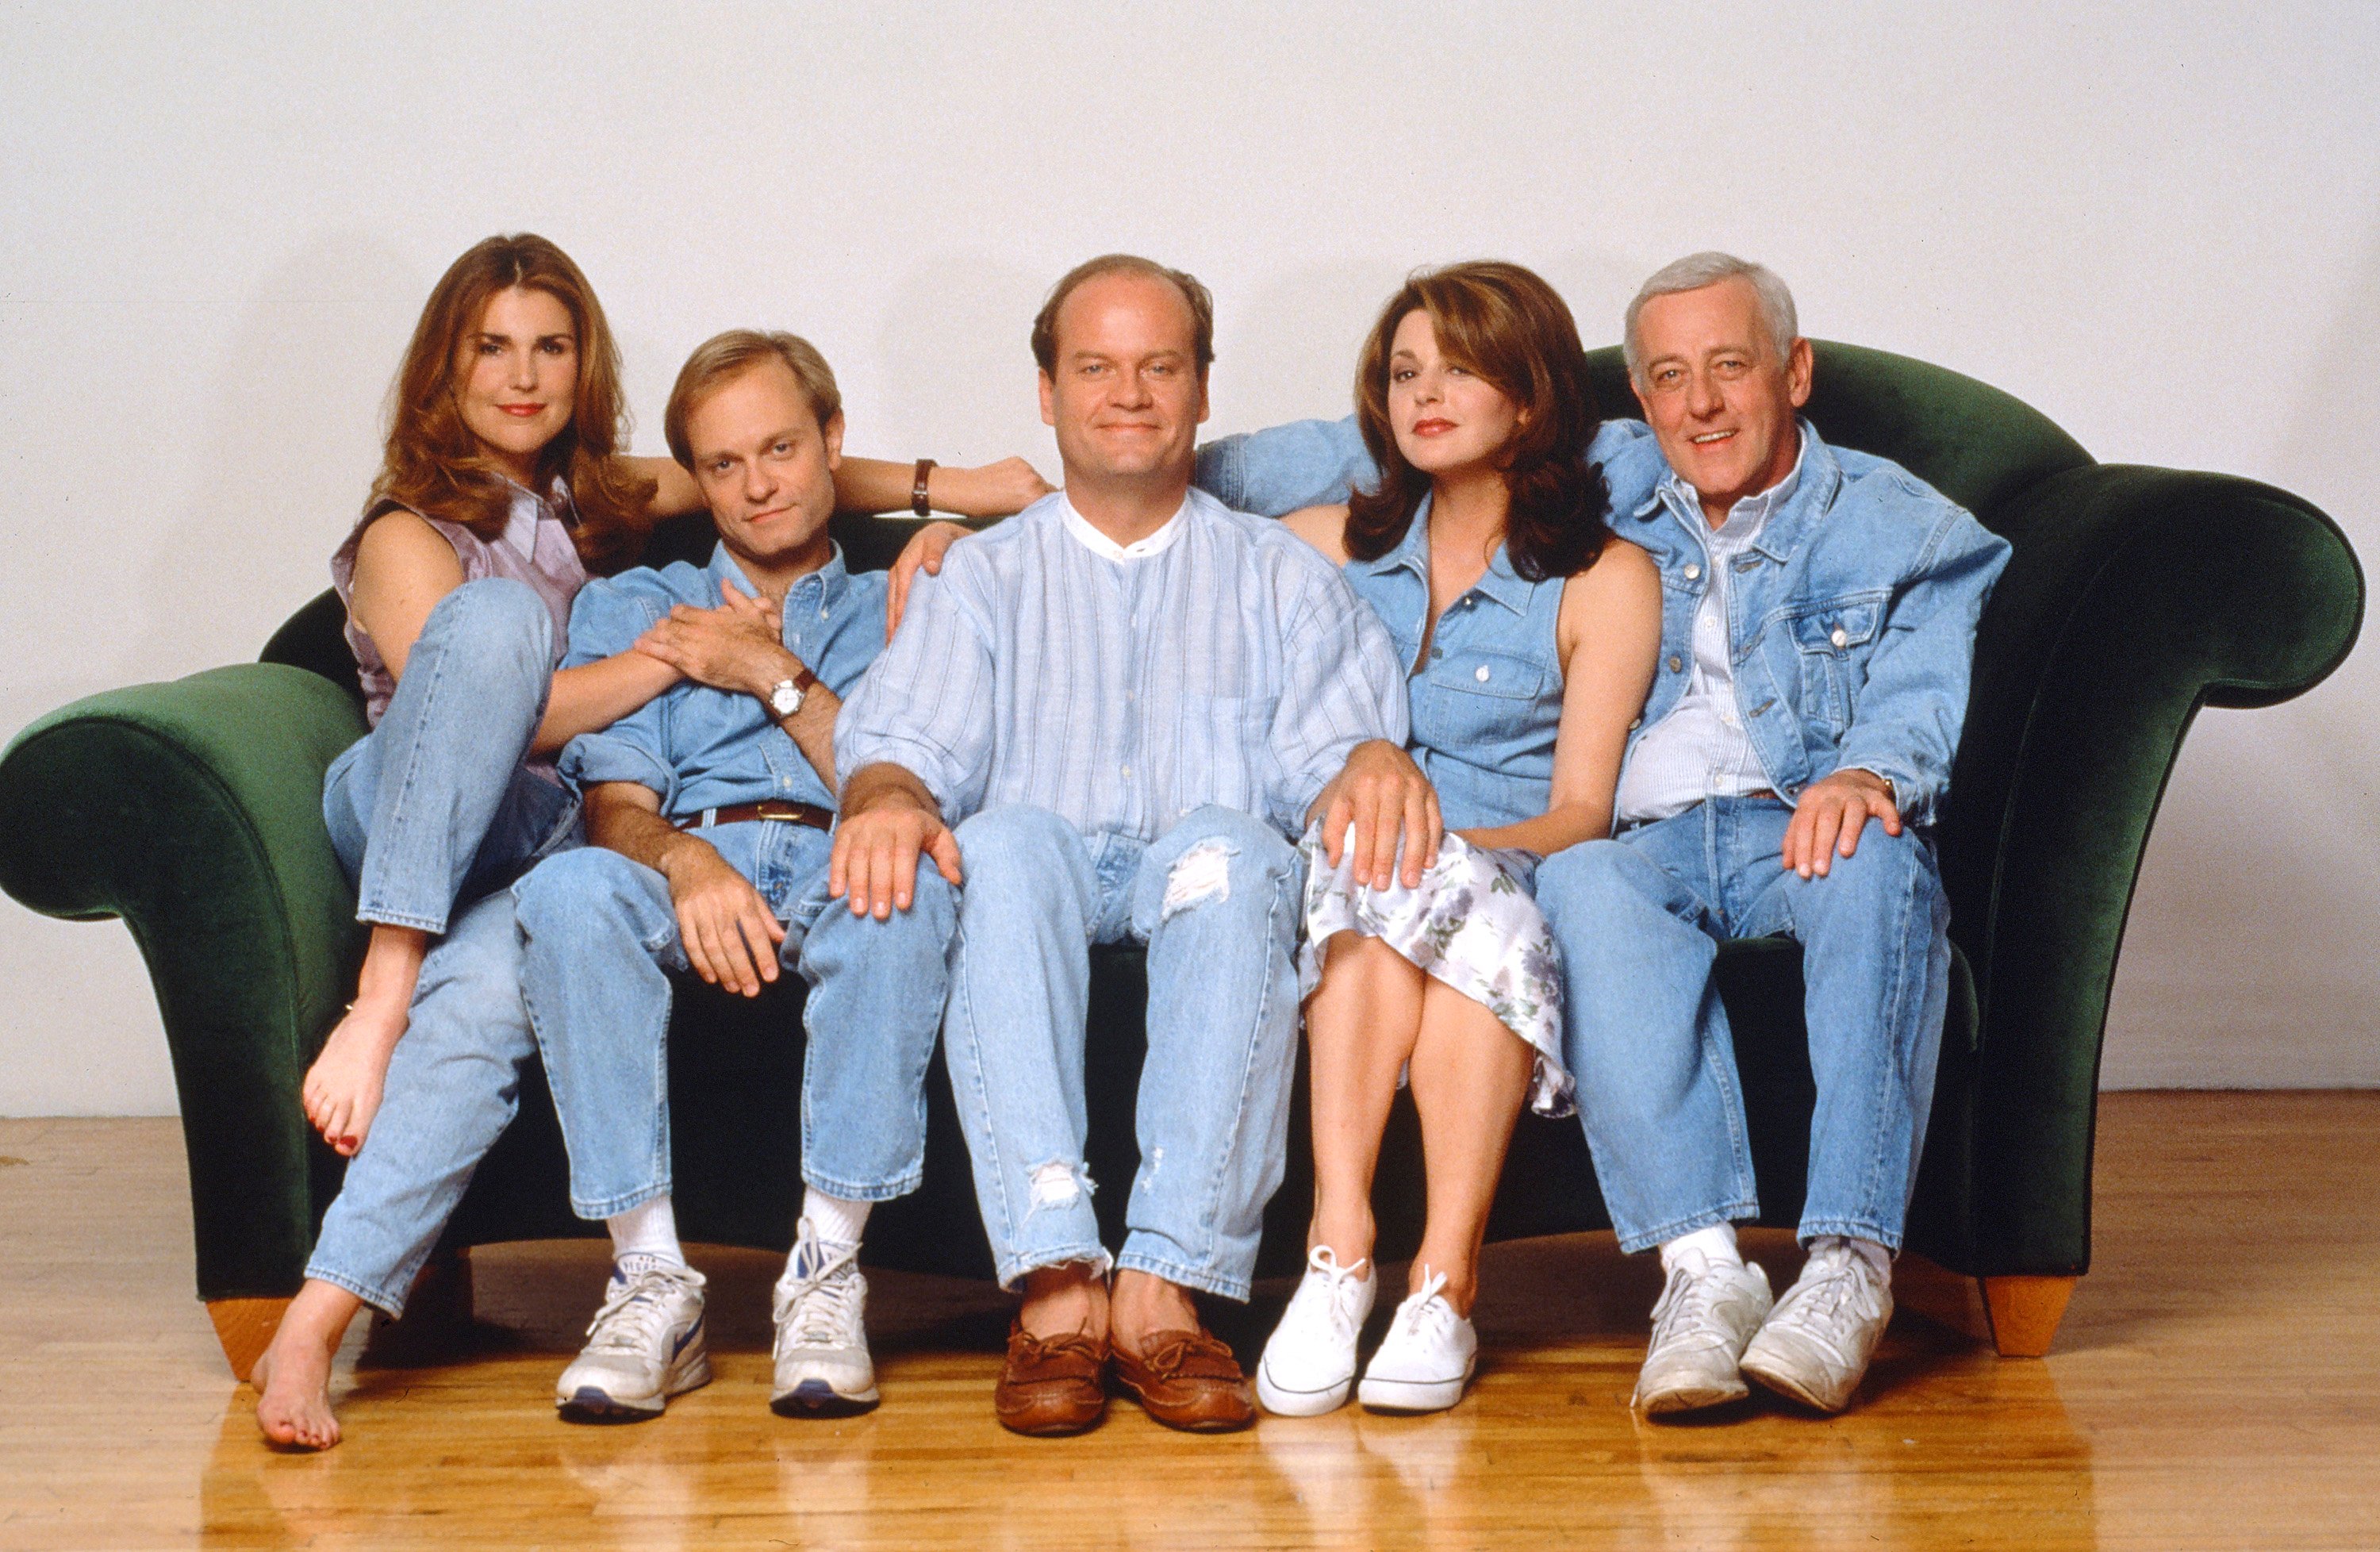 The cast of 'Frasier' sits on a couch together for a promotional photo